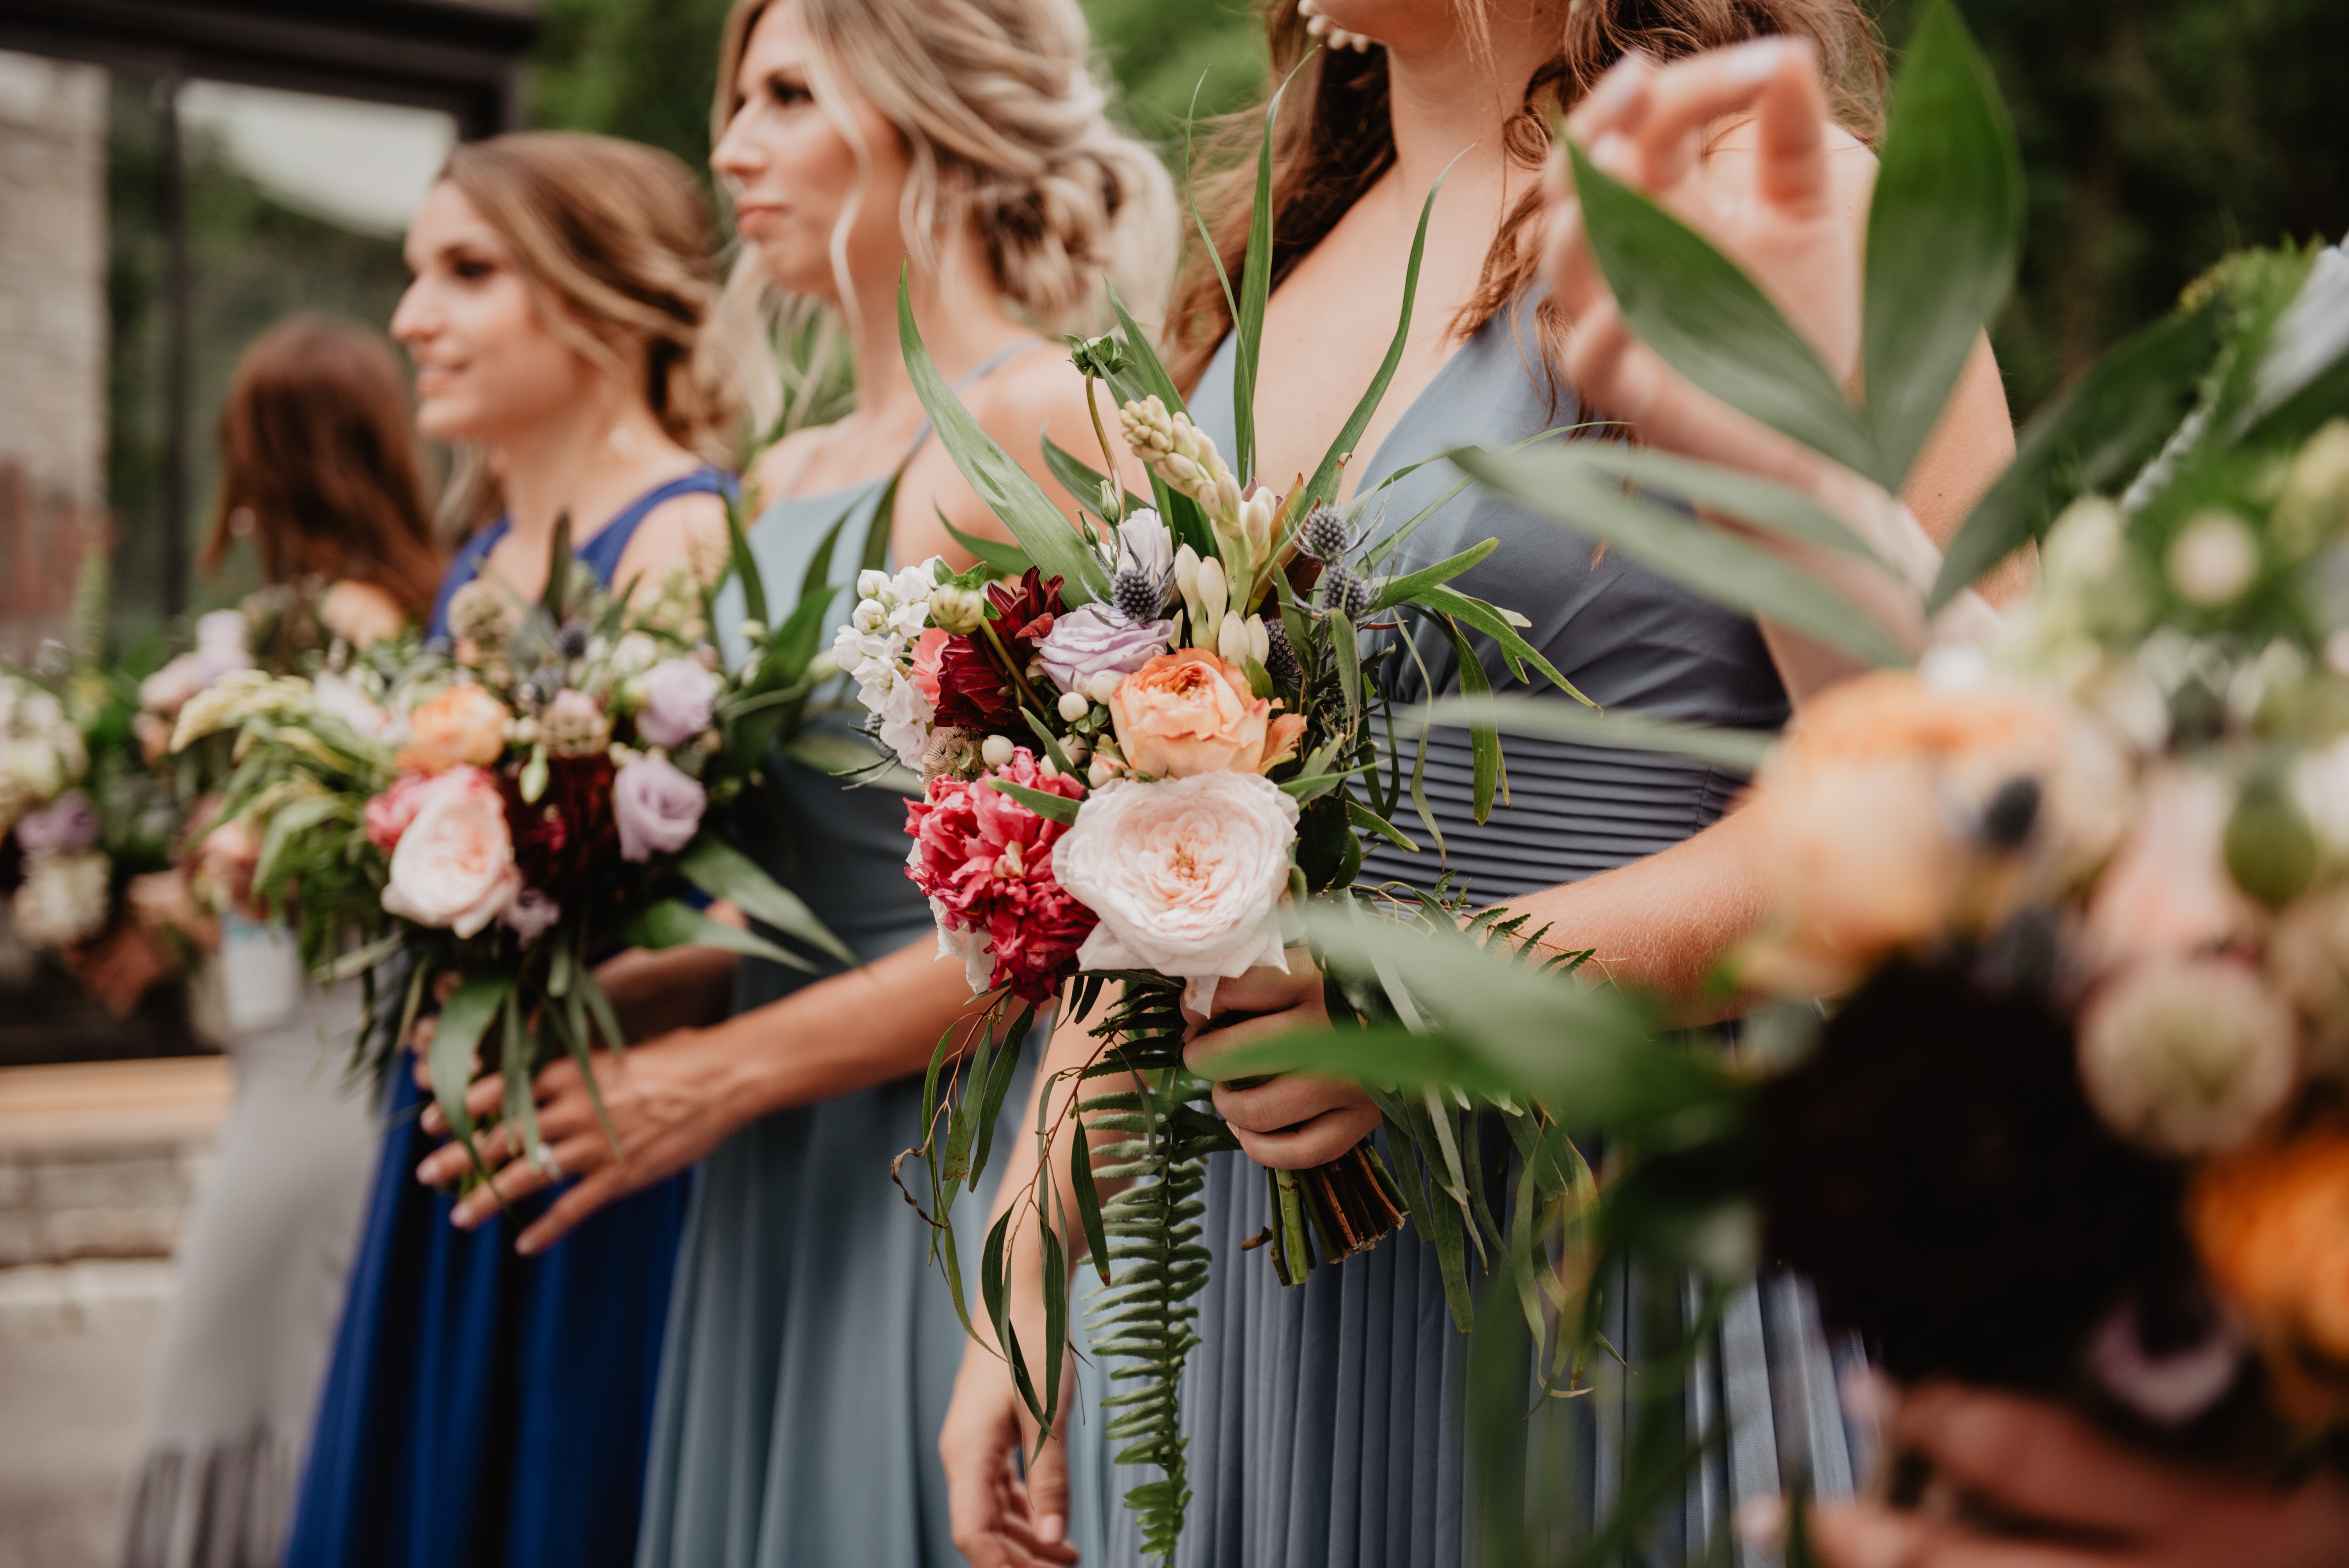 Bridesmaids and Their Duties: Making the Wedding Day Perfect